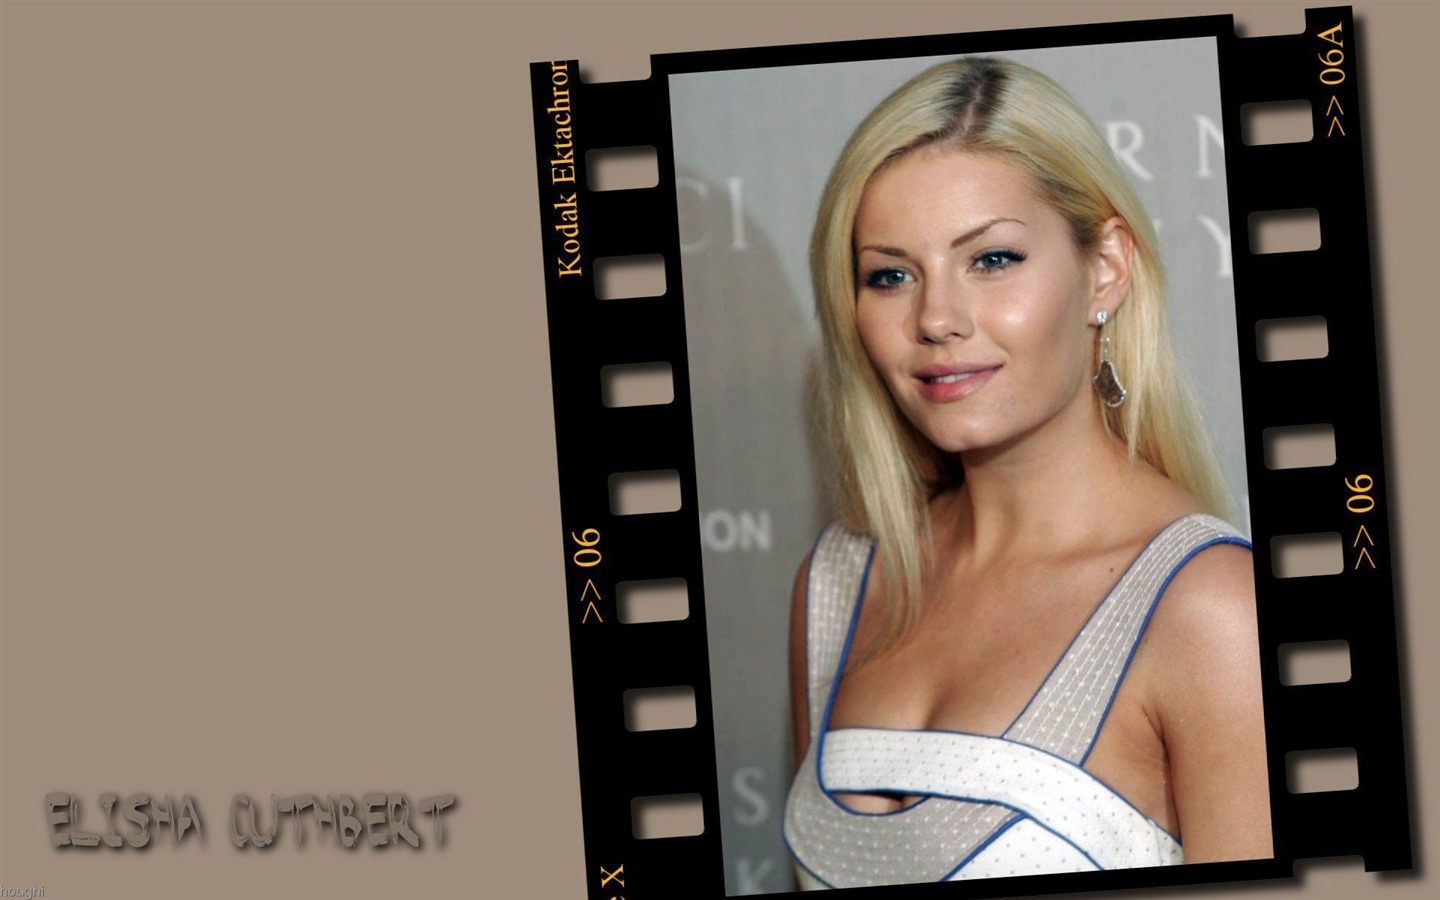 Elisha Cuthbert #011 - 1440x900 Wallpapers Pictures Photos Images